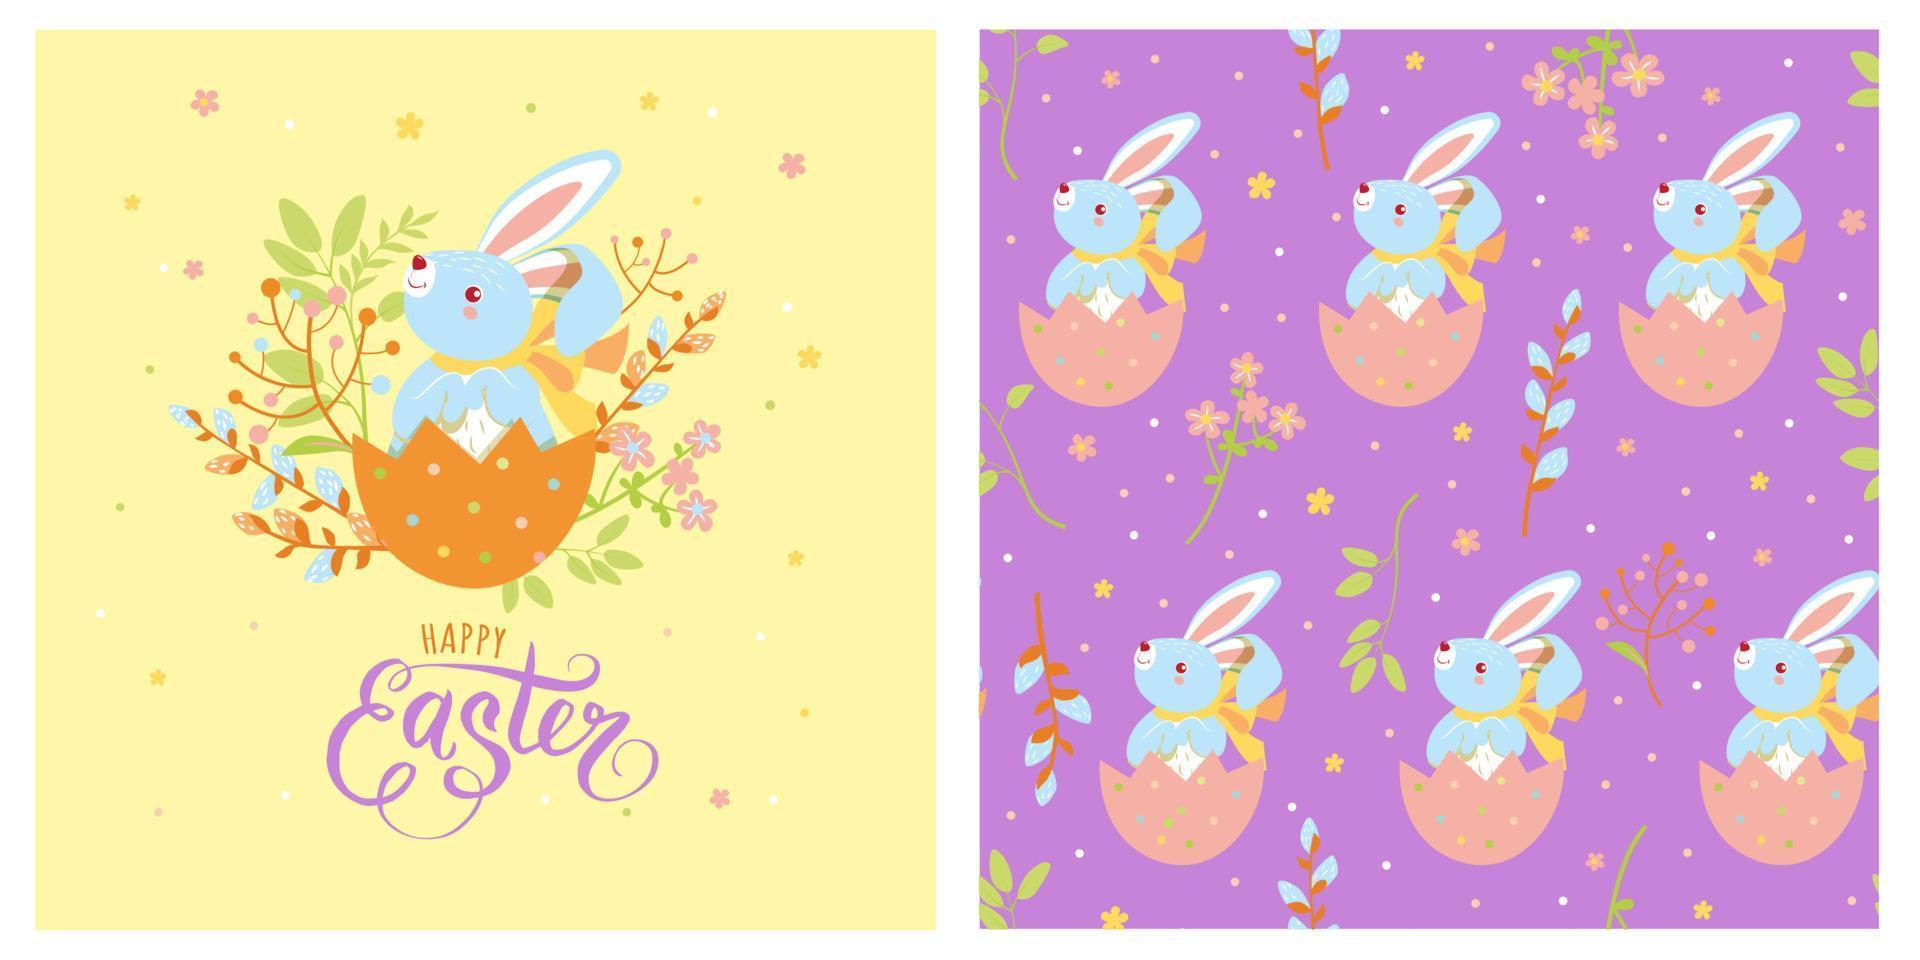 A cute rabbit sits in an Easter egg surrounded by spring flowers with happy easter text. Easter colorful illustration and seamless pattern. vector